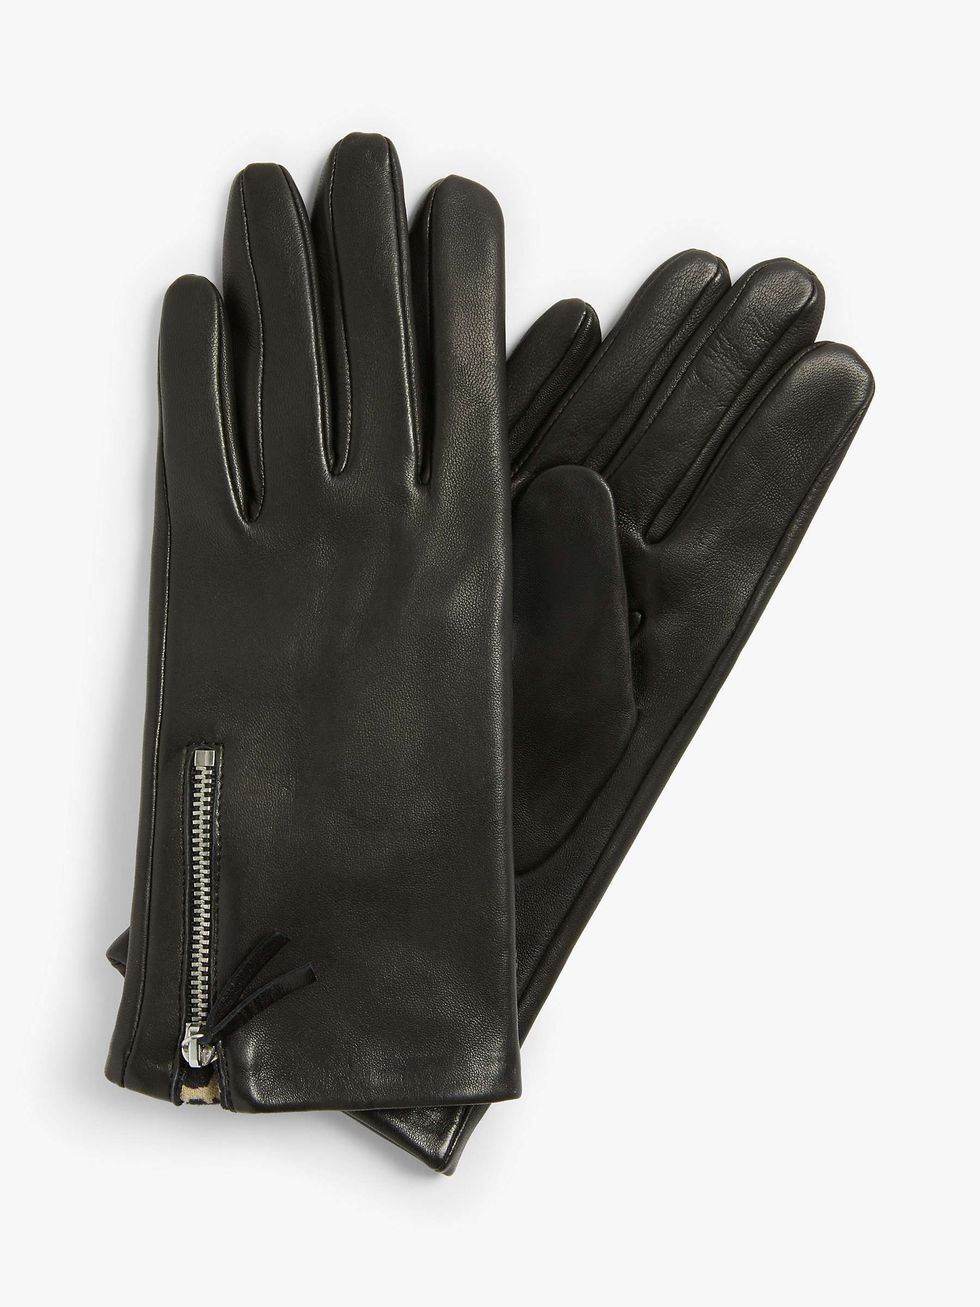 Best winter gloves and mittens to keep you toasty